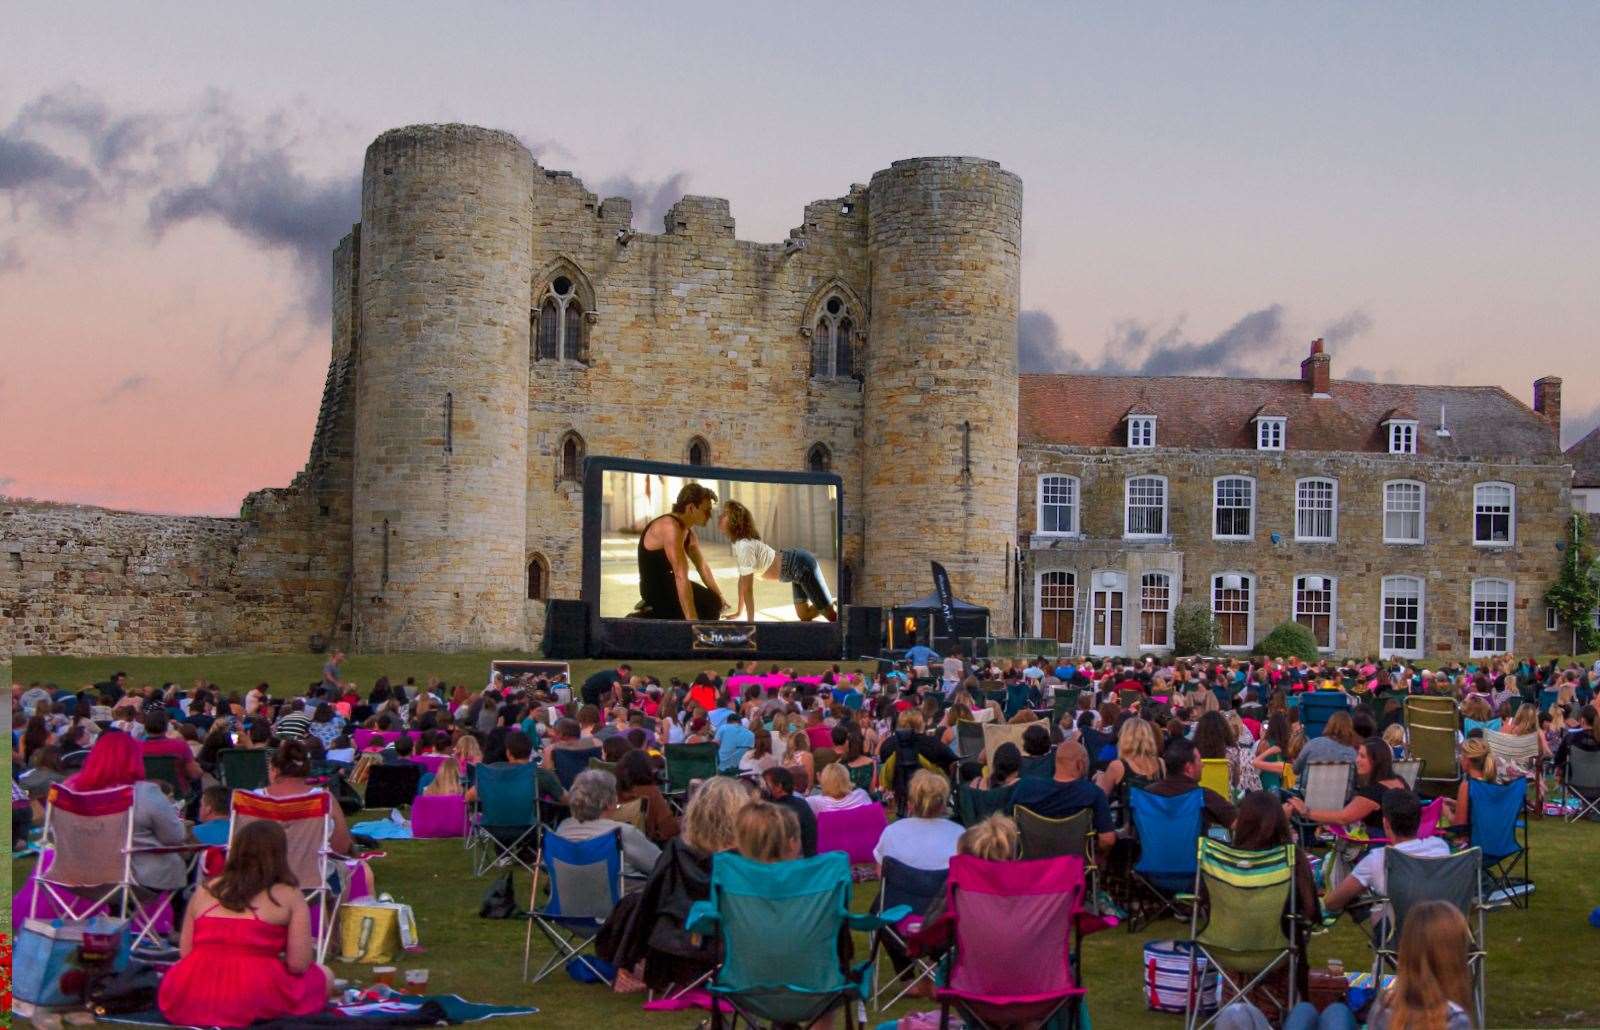 A previous Luna cinema screening at Tonbridge Castle - it will return but with social distancing in place